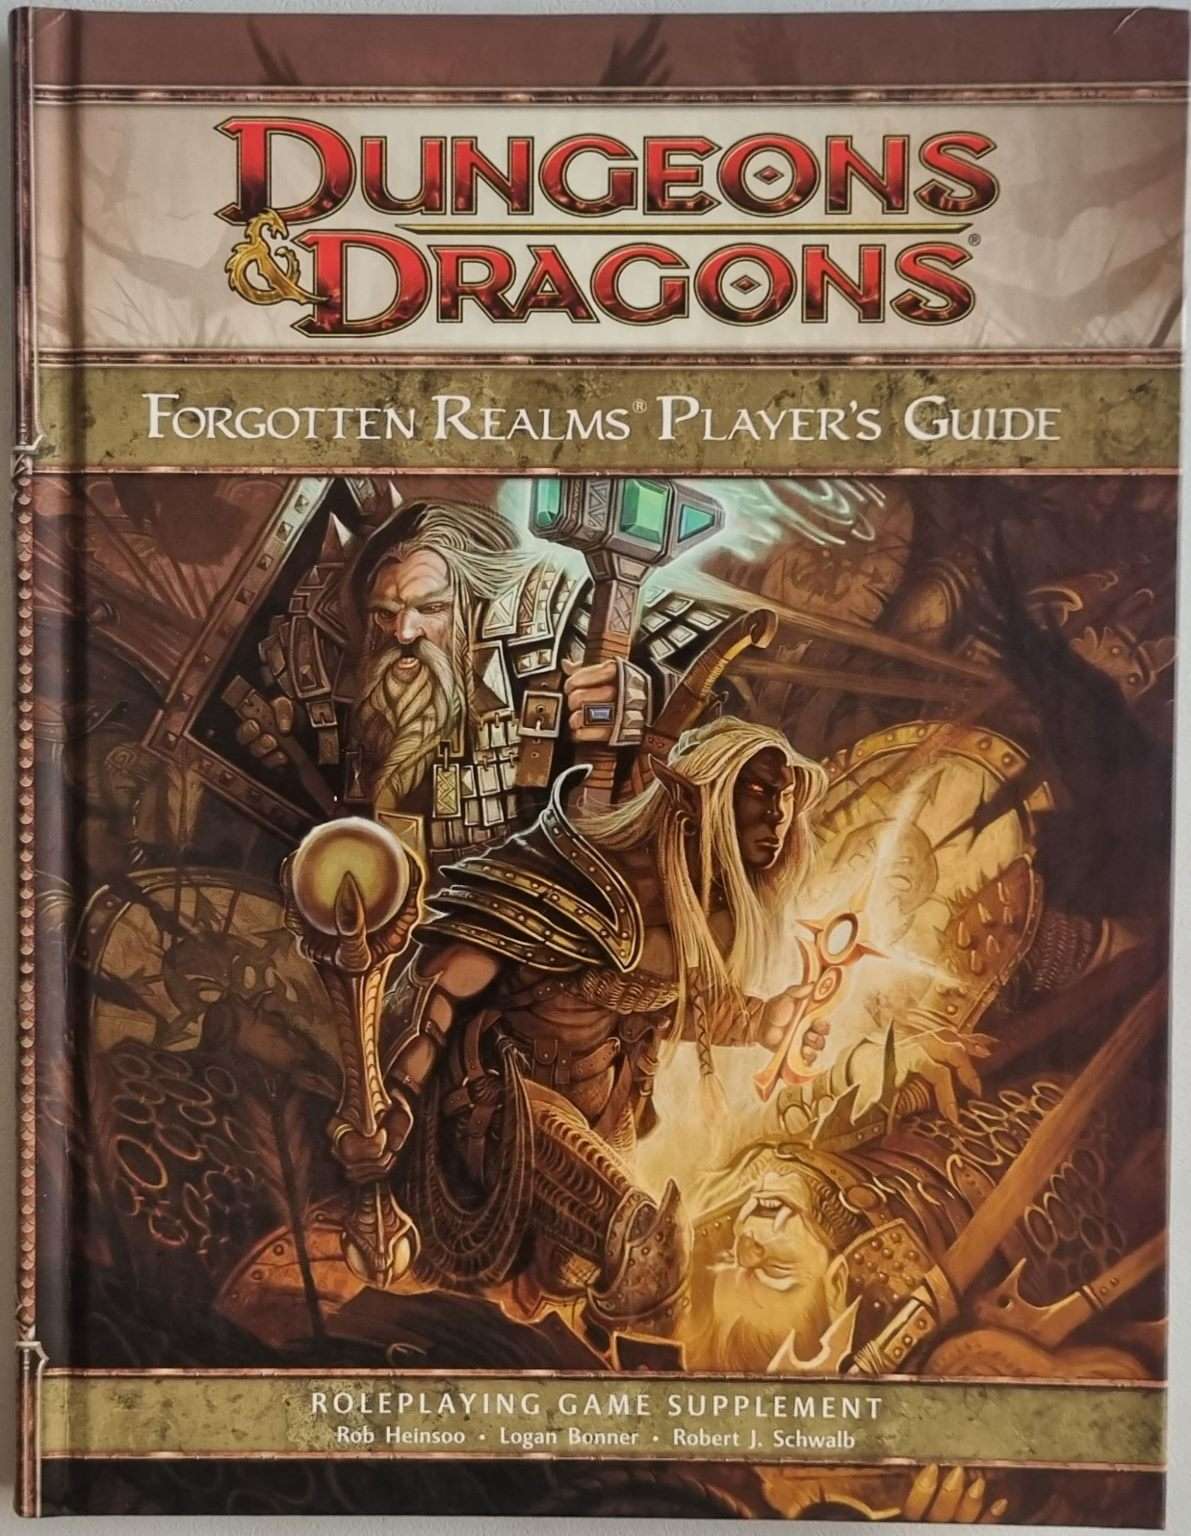 Dungeons and Dragons - Forgotten Realms Player's Guide 4e